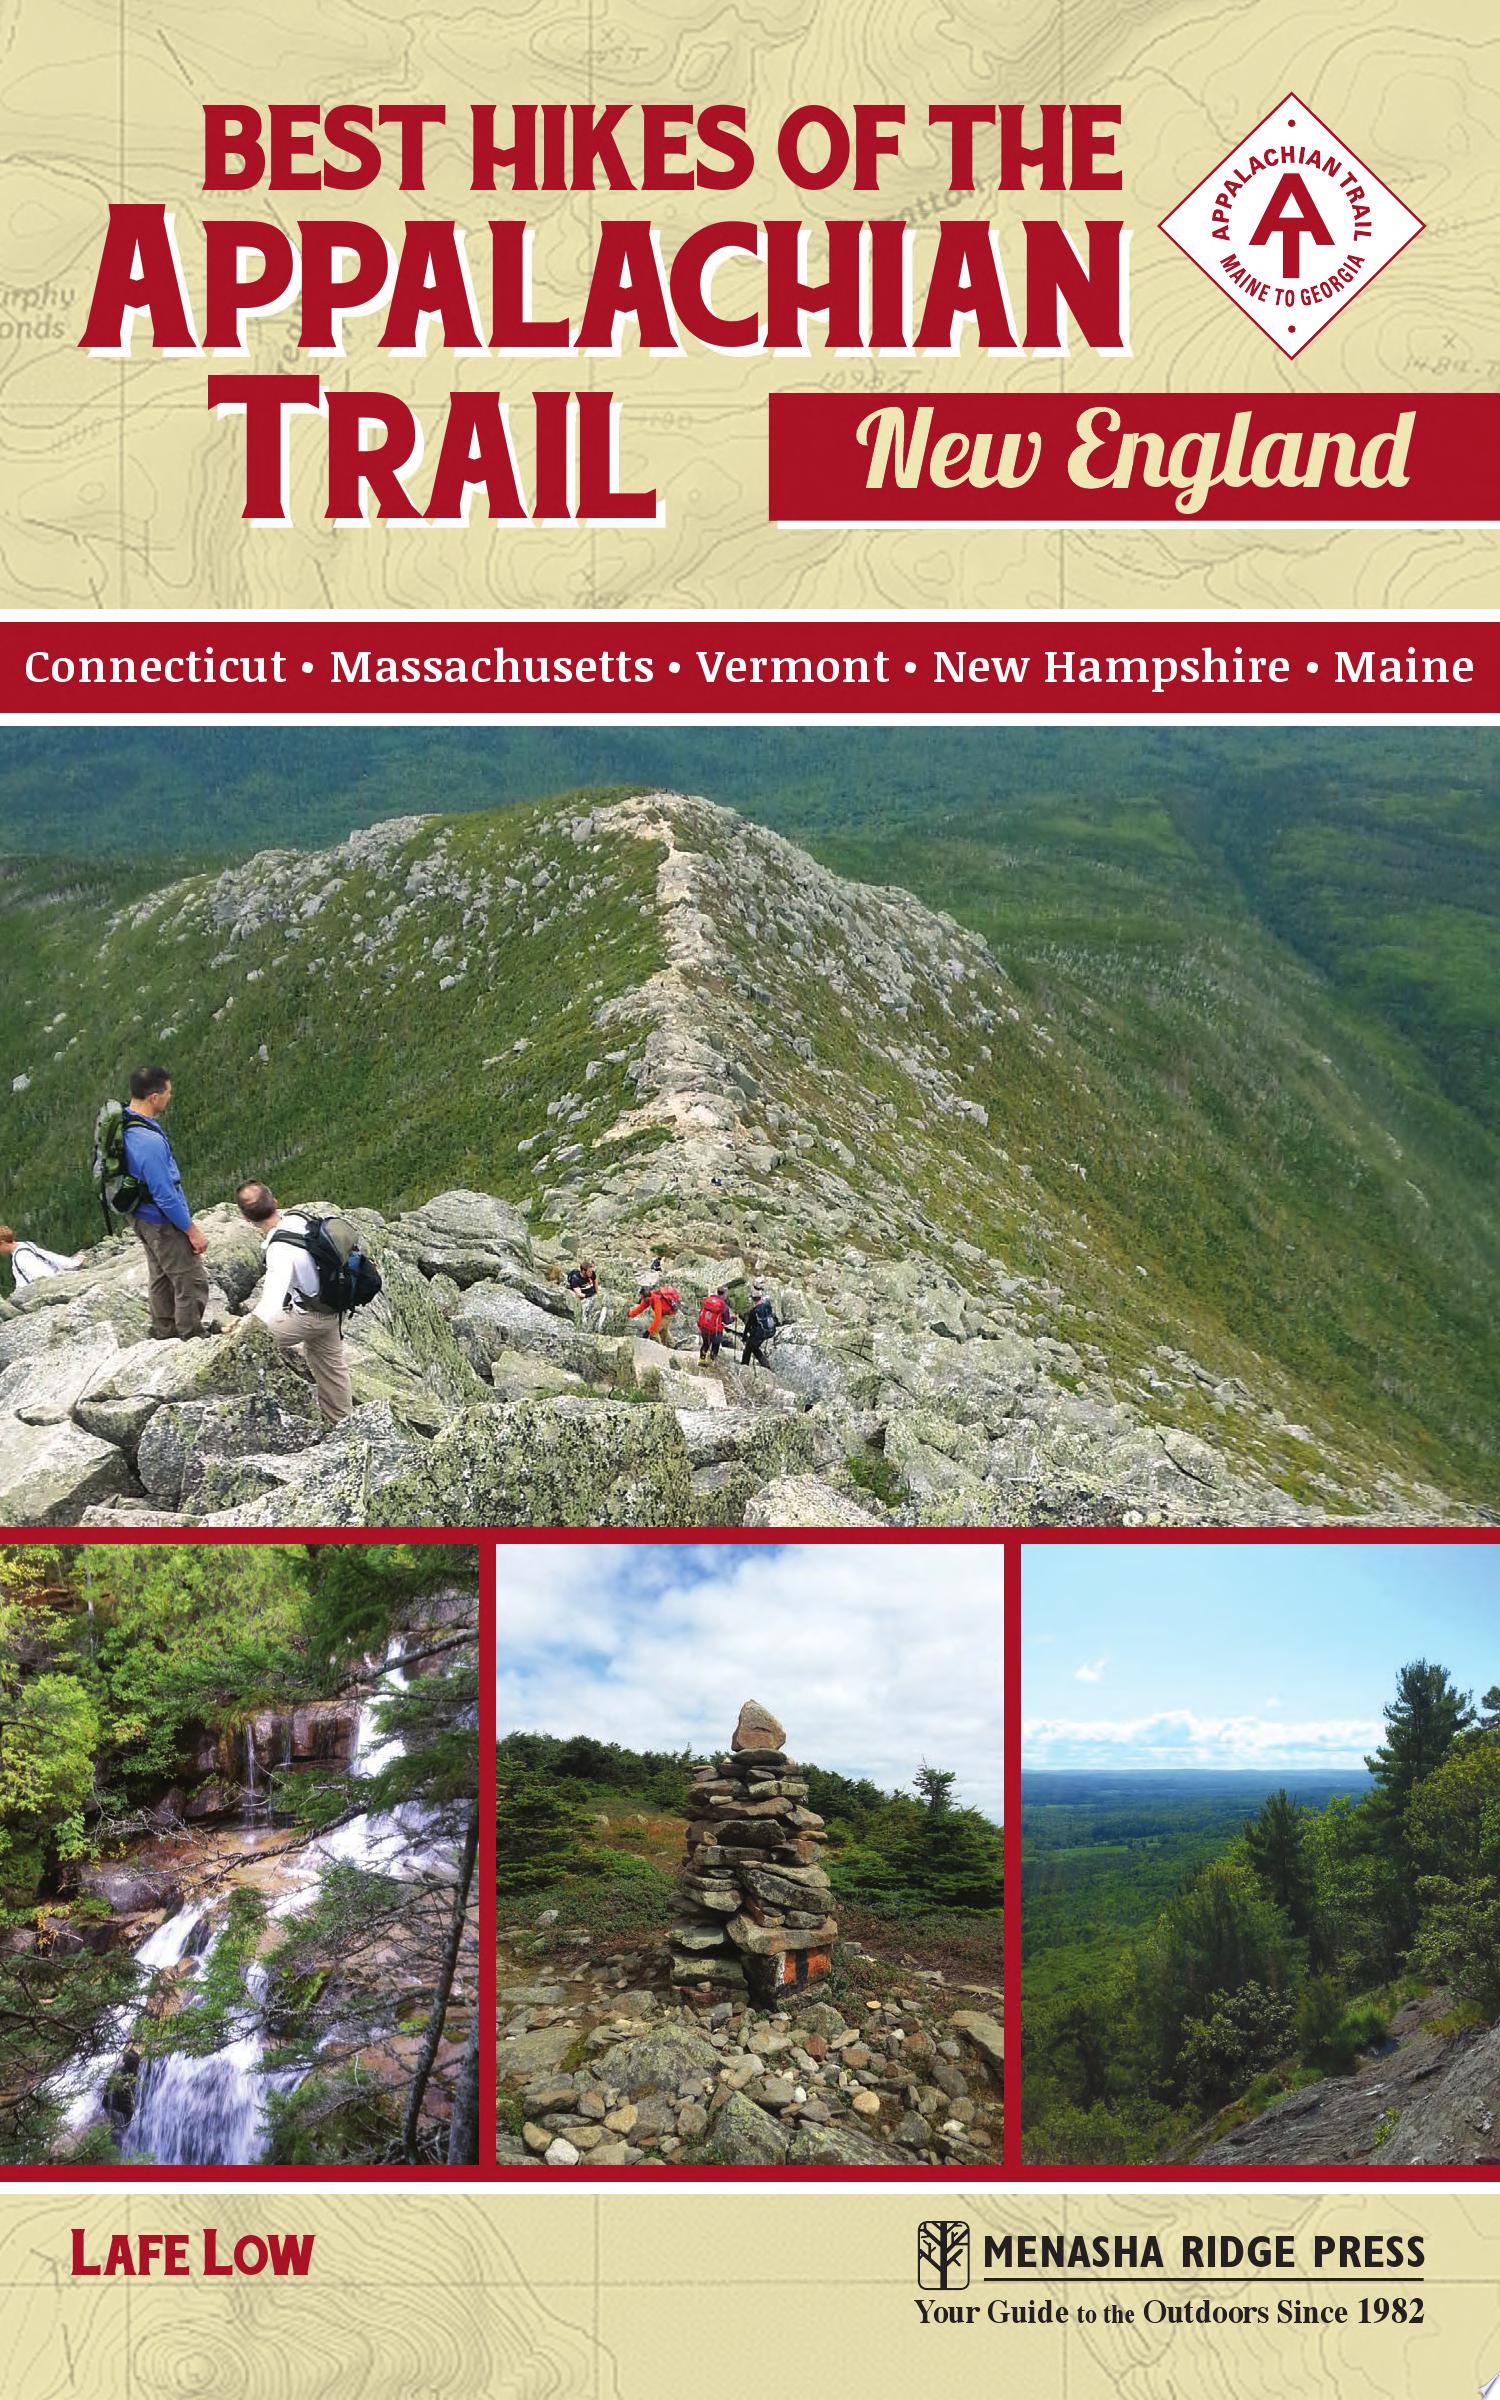 Image for "Best Hikes of the Appalachian Trail: New England"